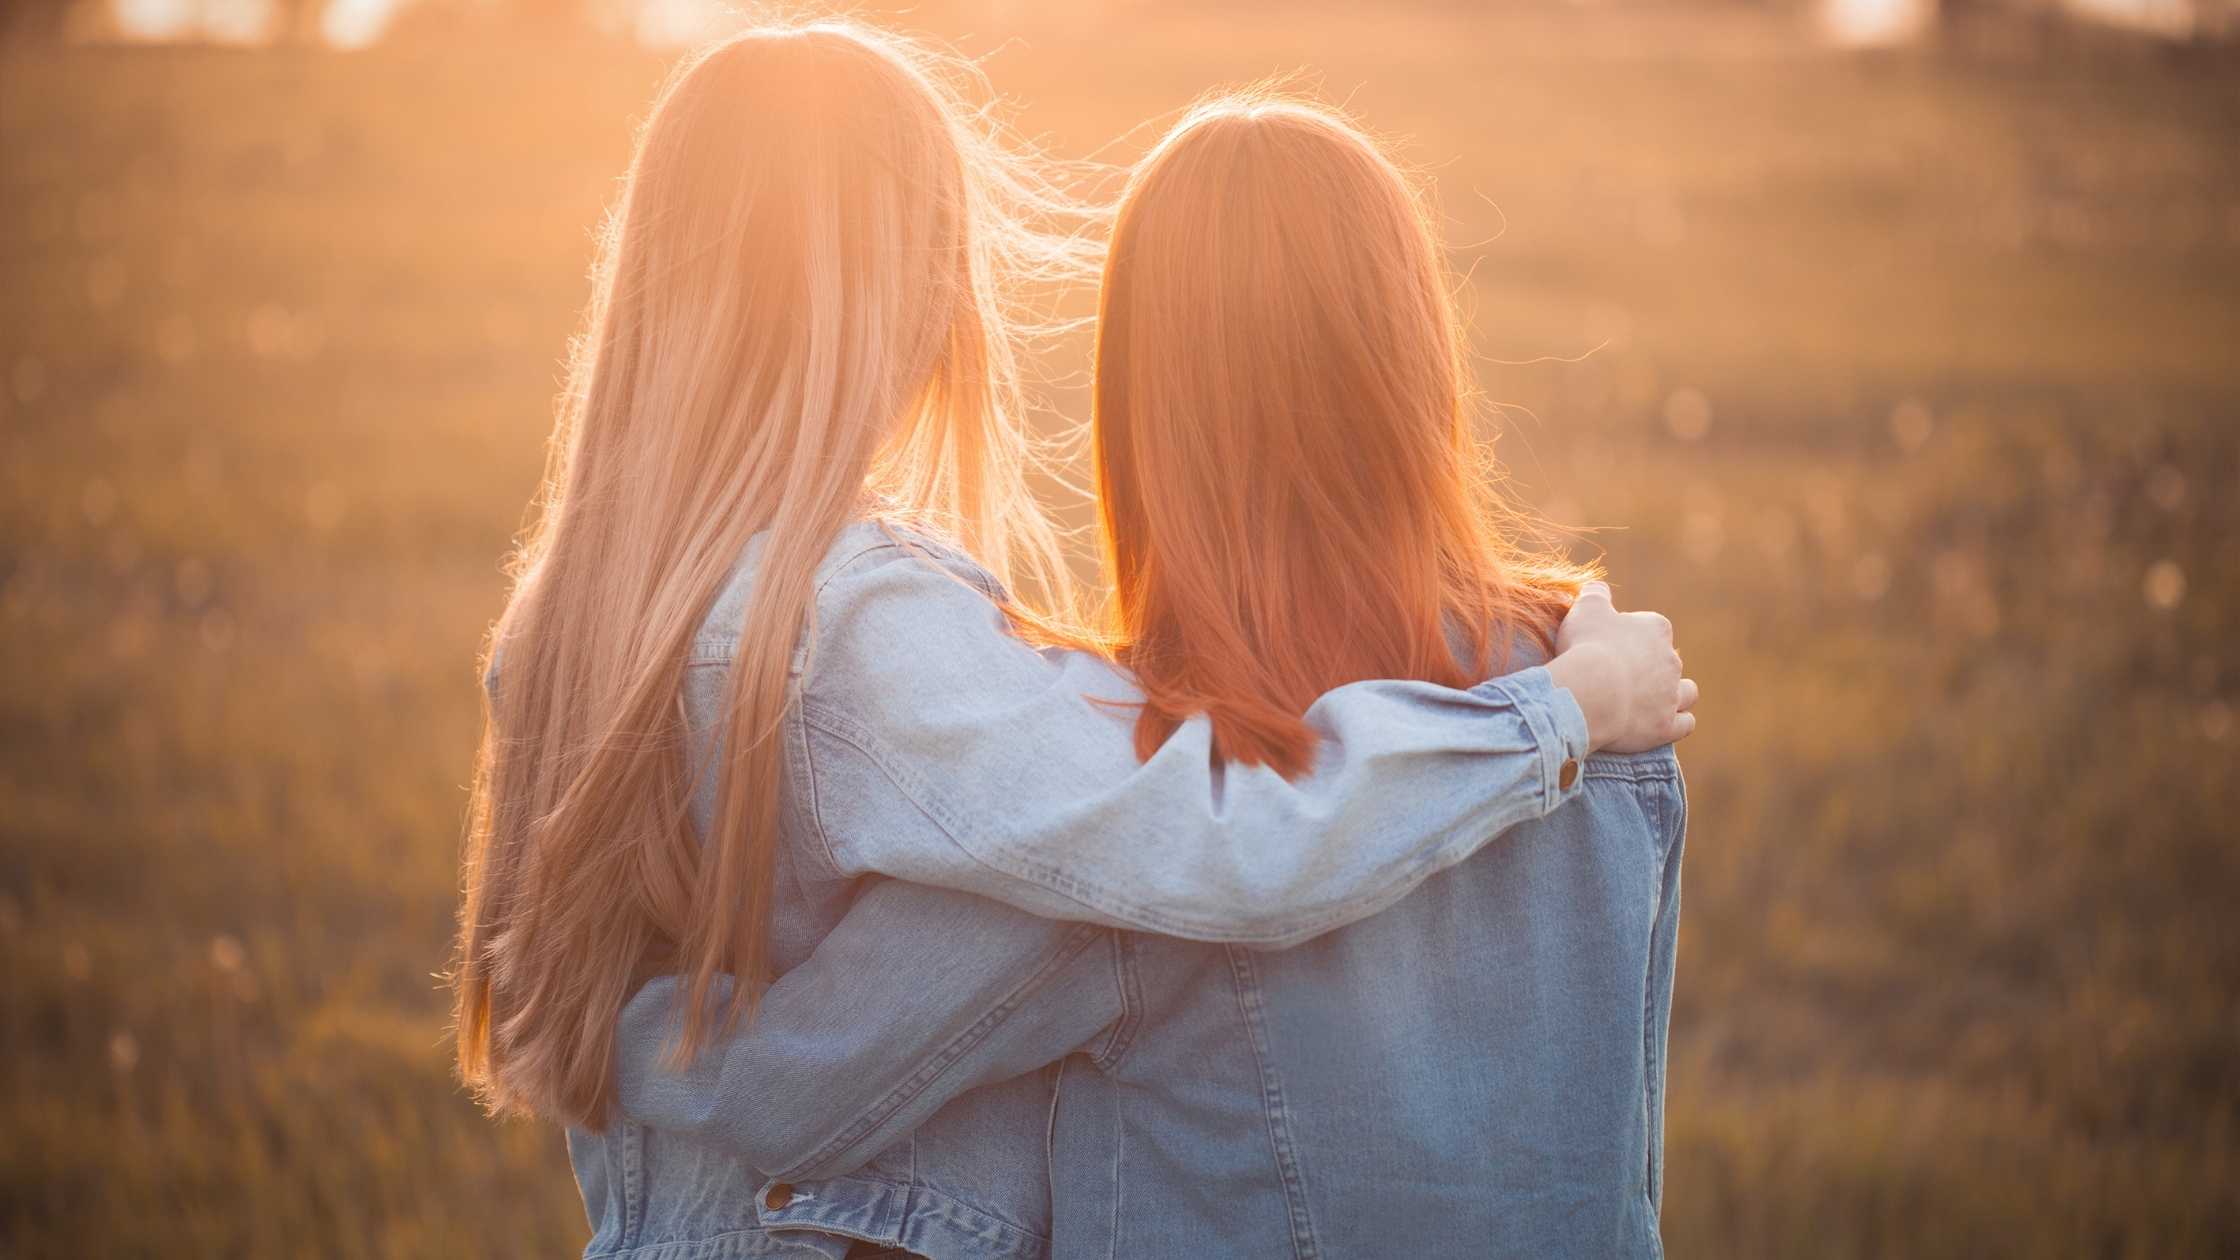 Friends in the sunset embracing. Online therapy in Virginia can help you heal. Get support with an online therapist for anxiety, stress, depression, trauma and more.